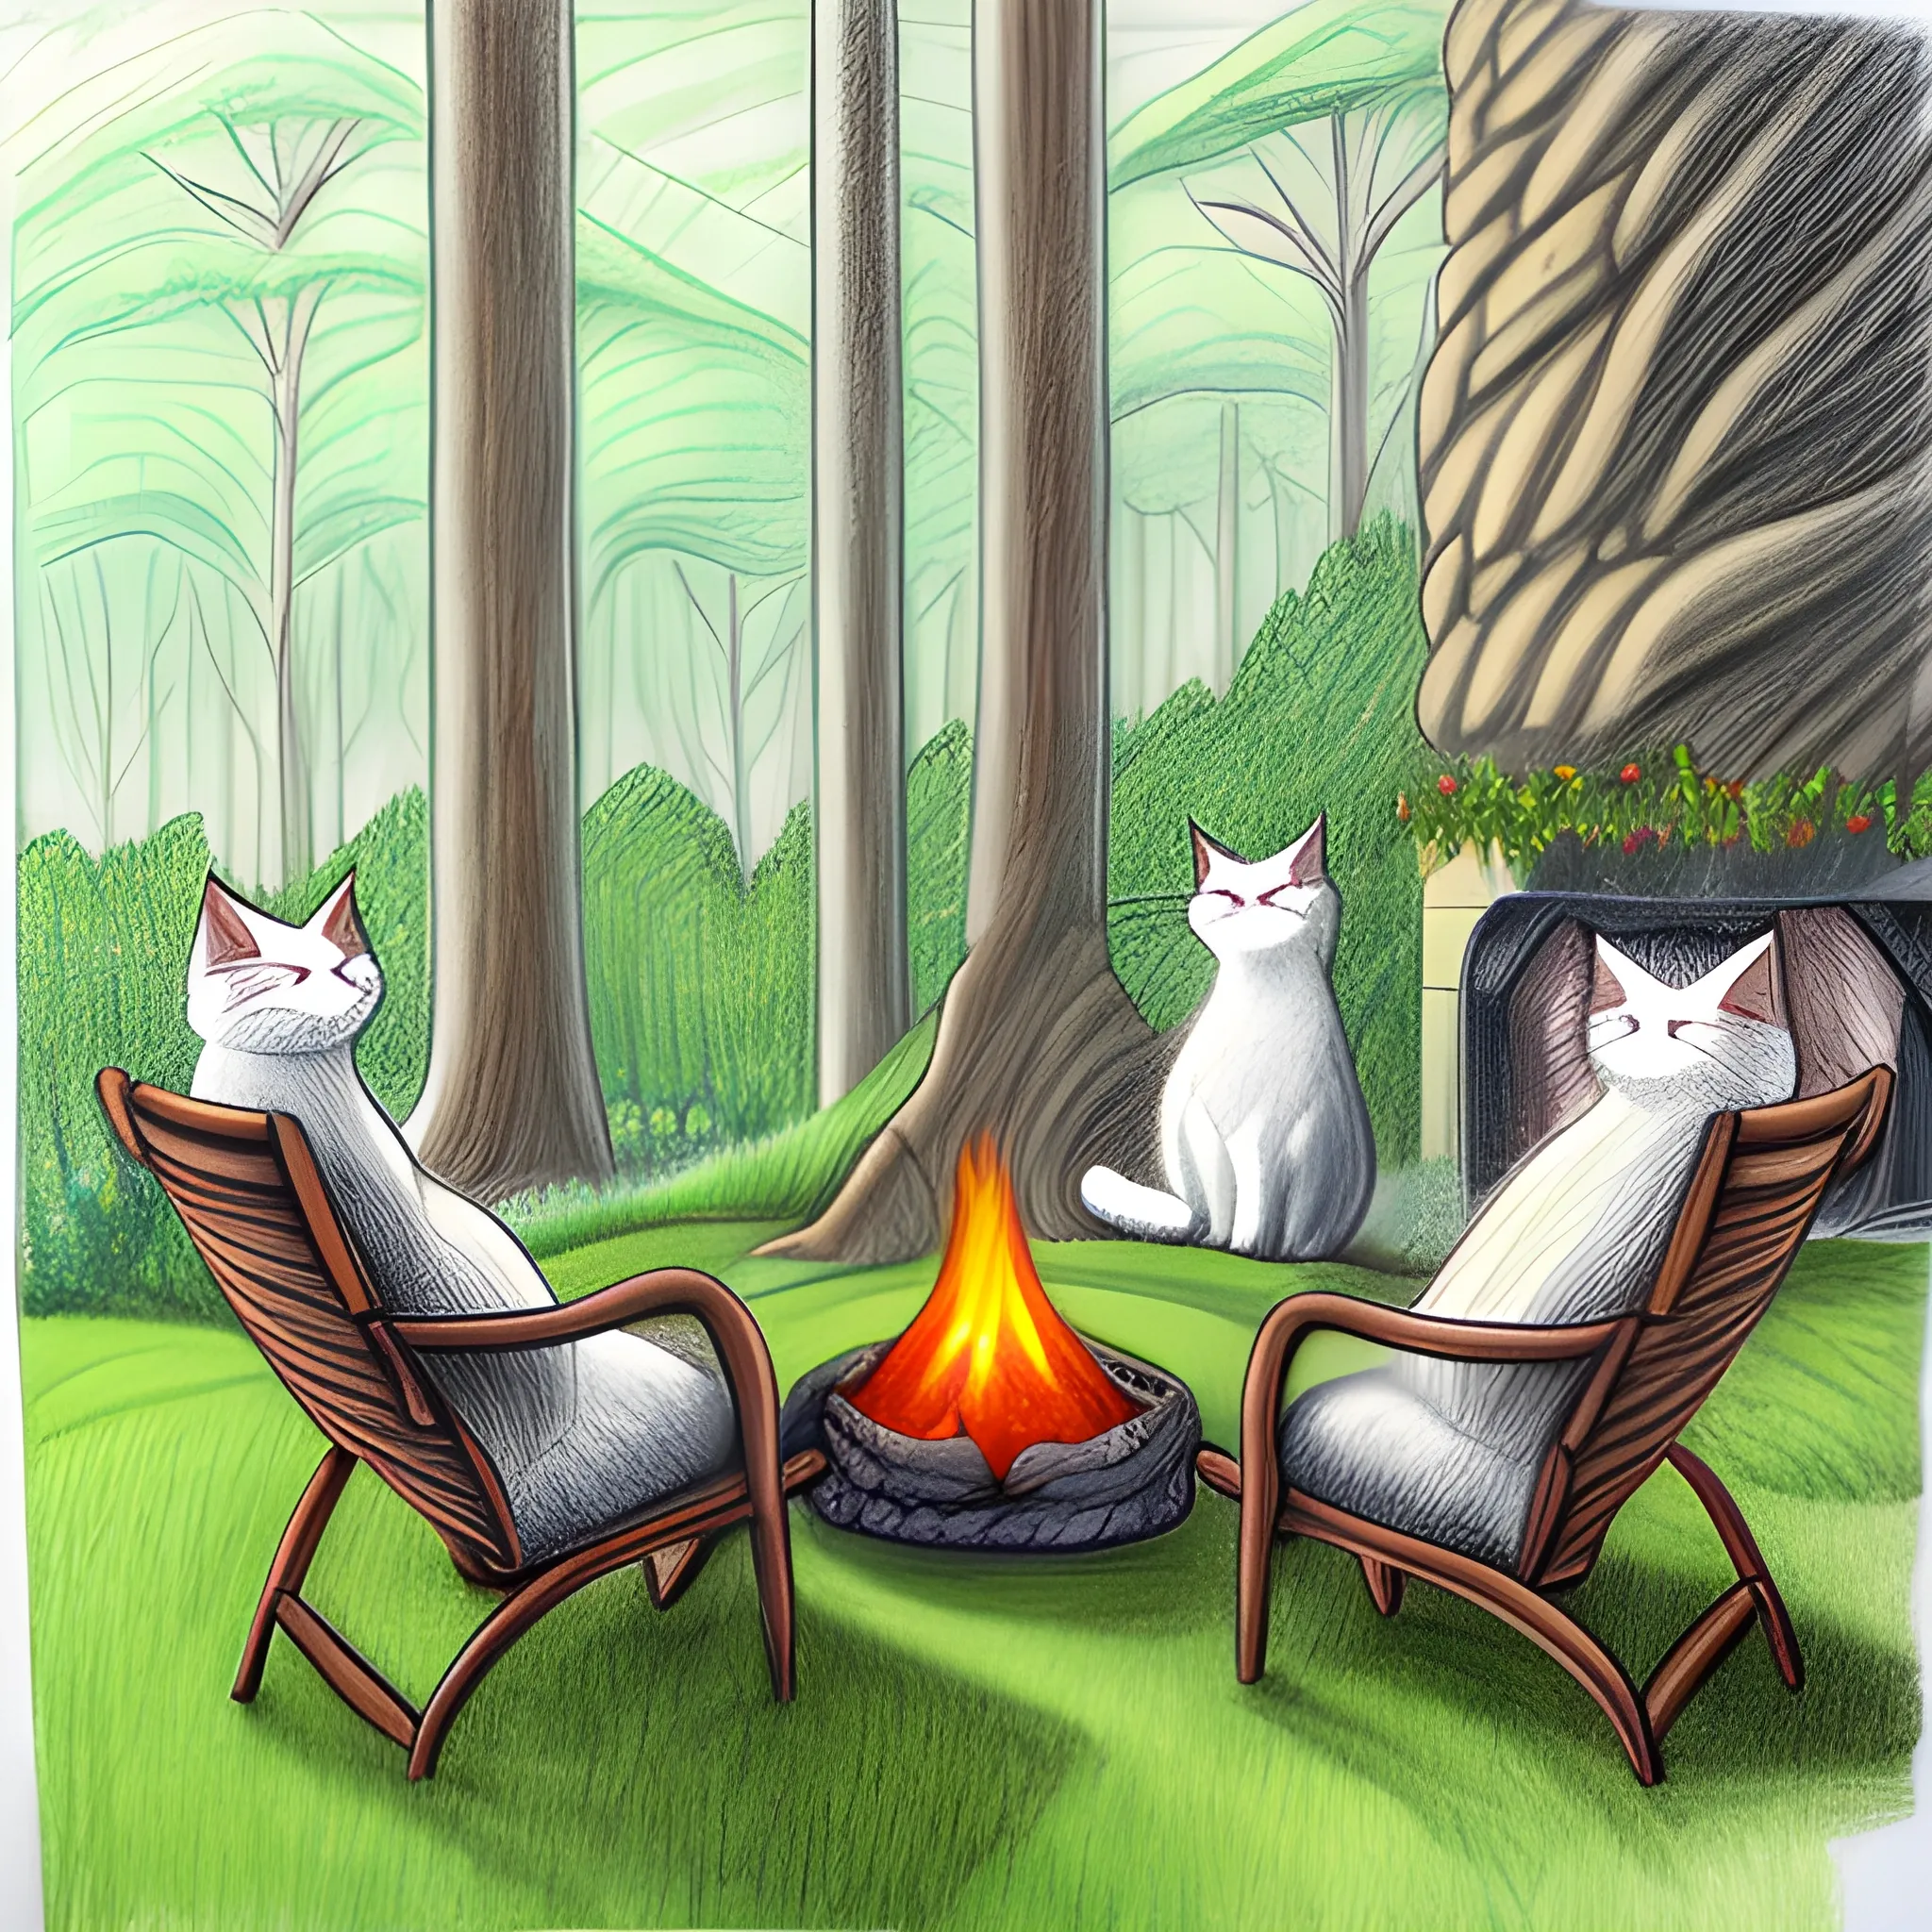 Pencil Sketch, cats cozy fireplace girl meadow forest trees gentle breeze laughing happy 